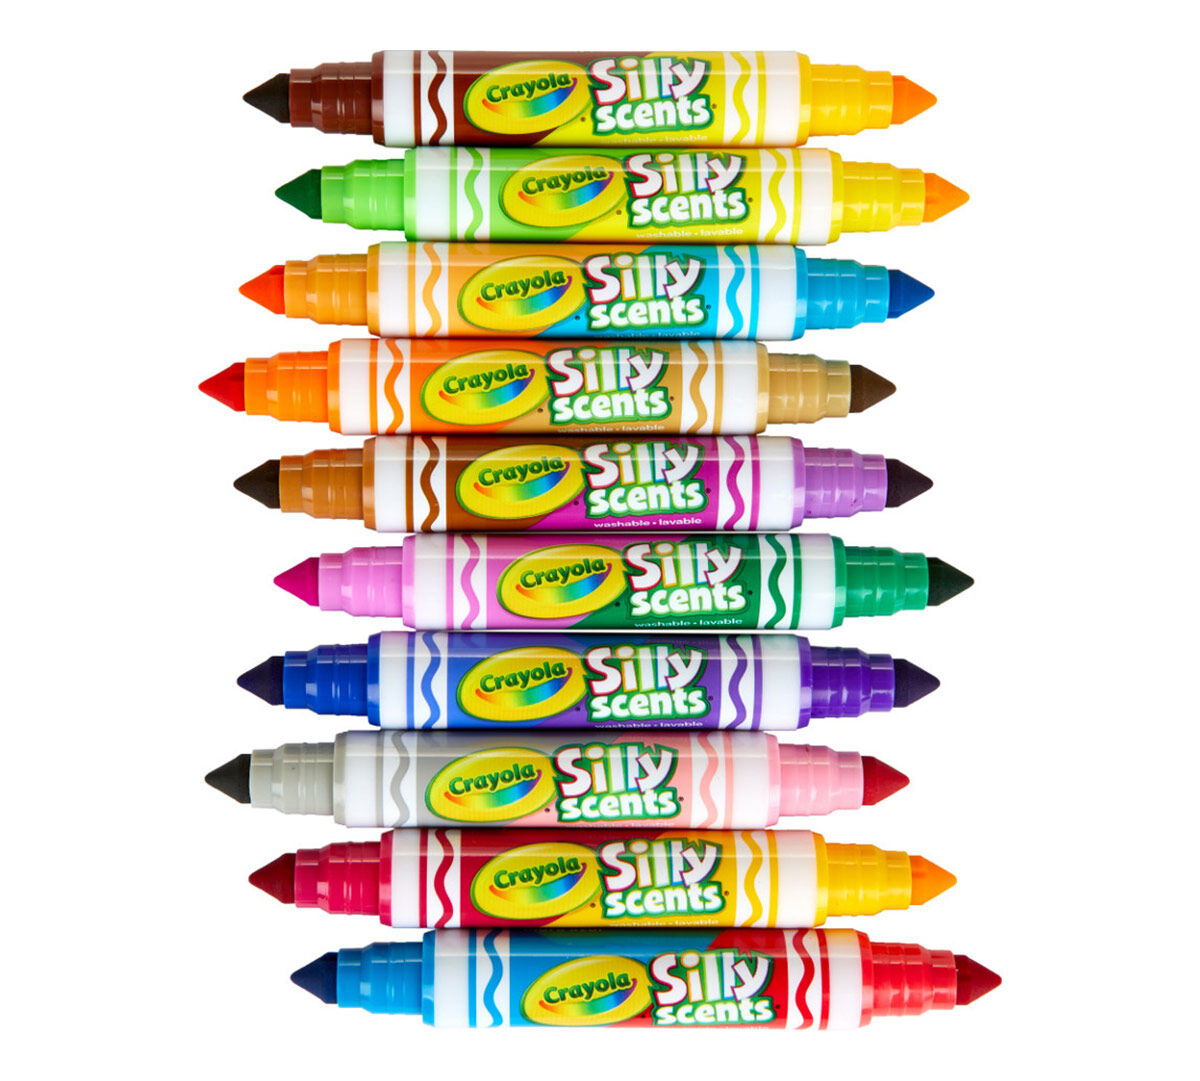 Crayola Silly Scents Dual-Ended Art Markers, School Supplies, Beginner Child, 10 Count - image 3 of 6